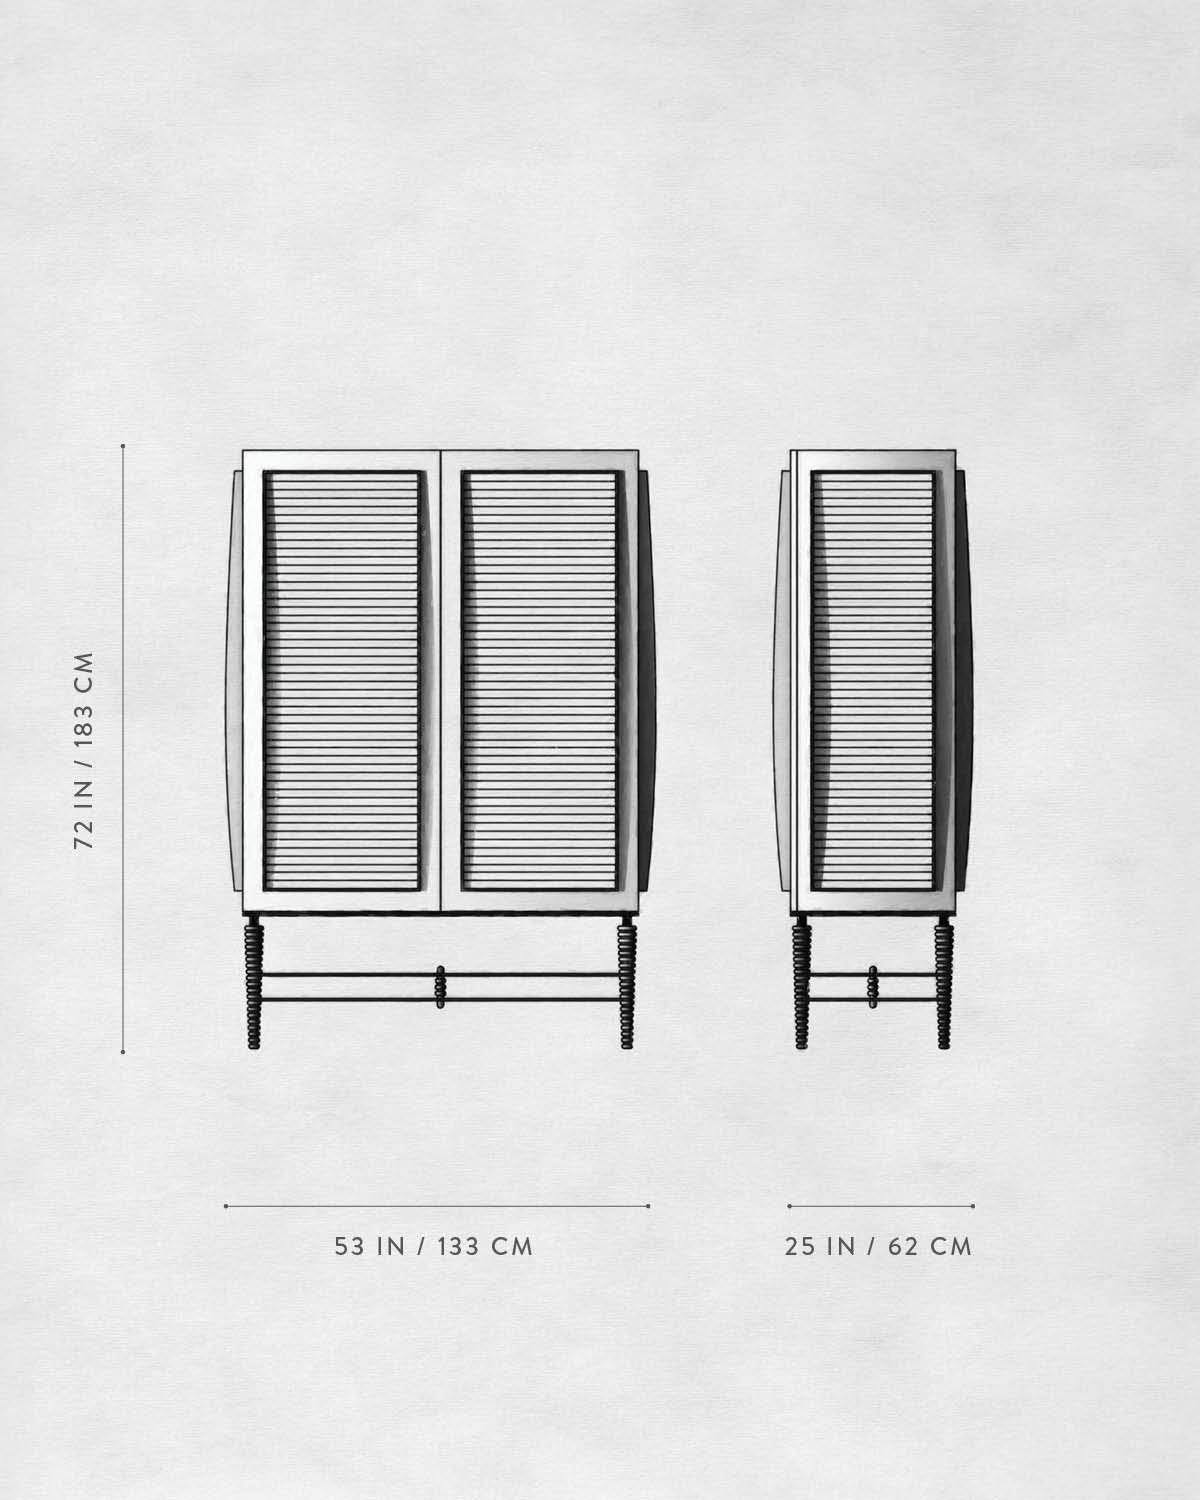 Technical drawing of INTERLUDE : CABINET VARIATION 01.